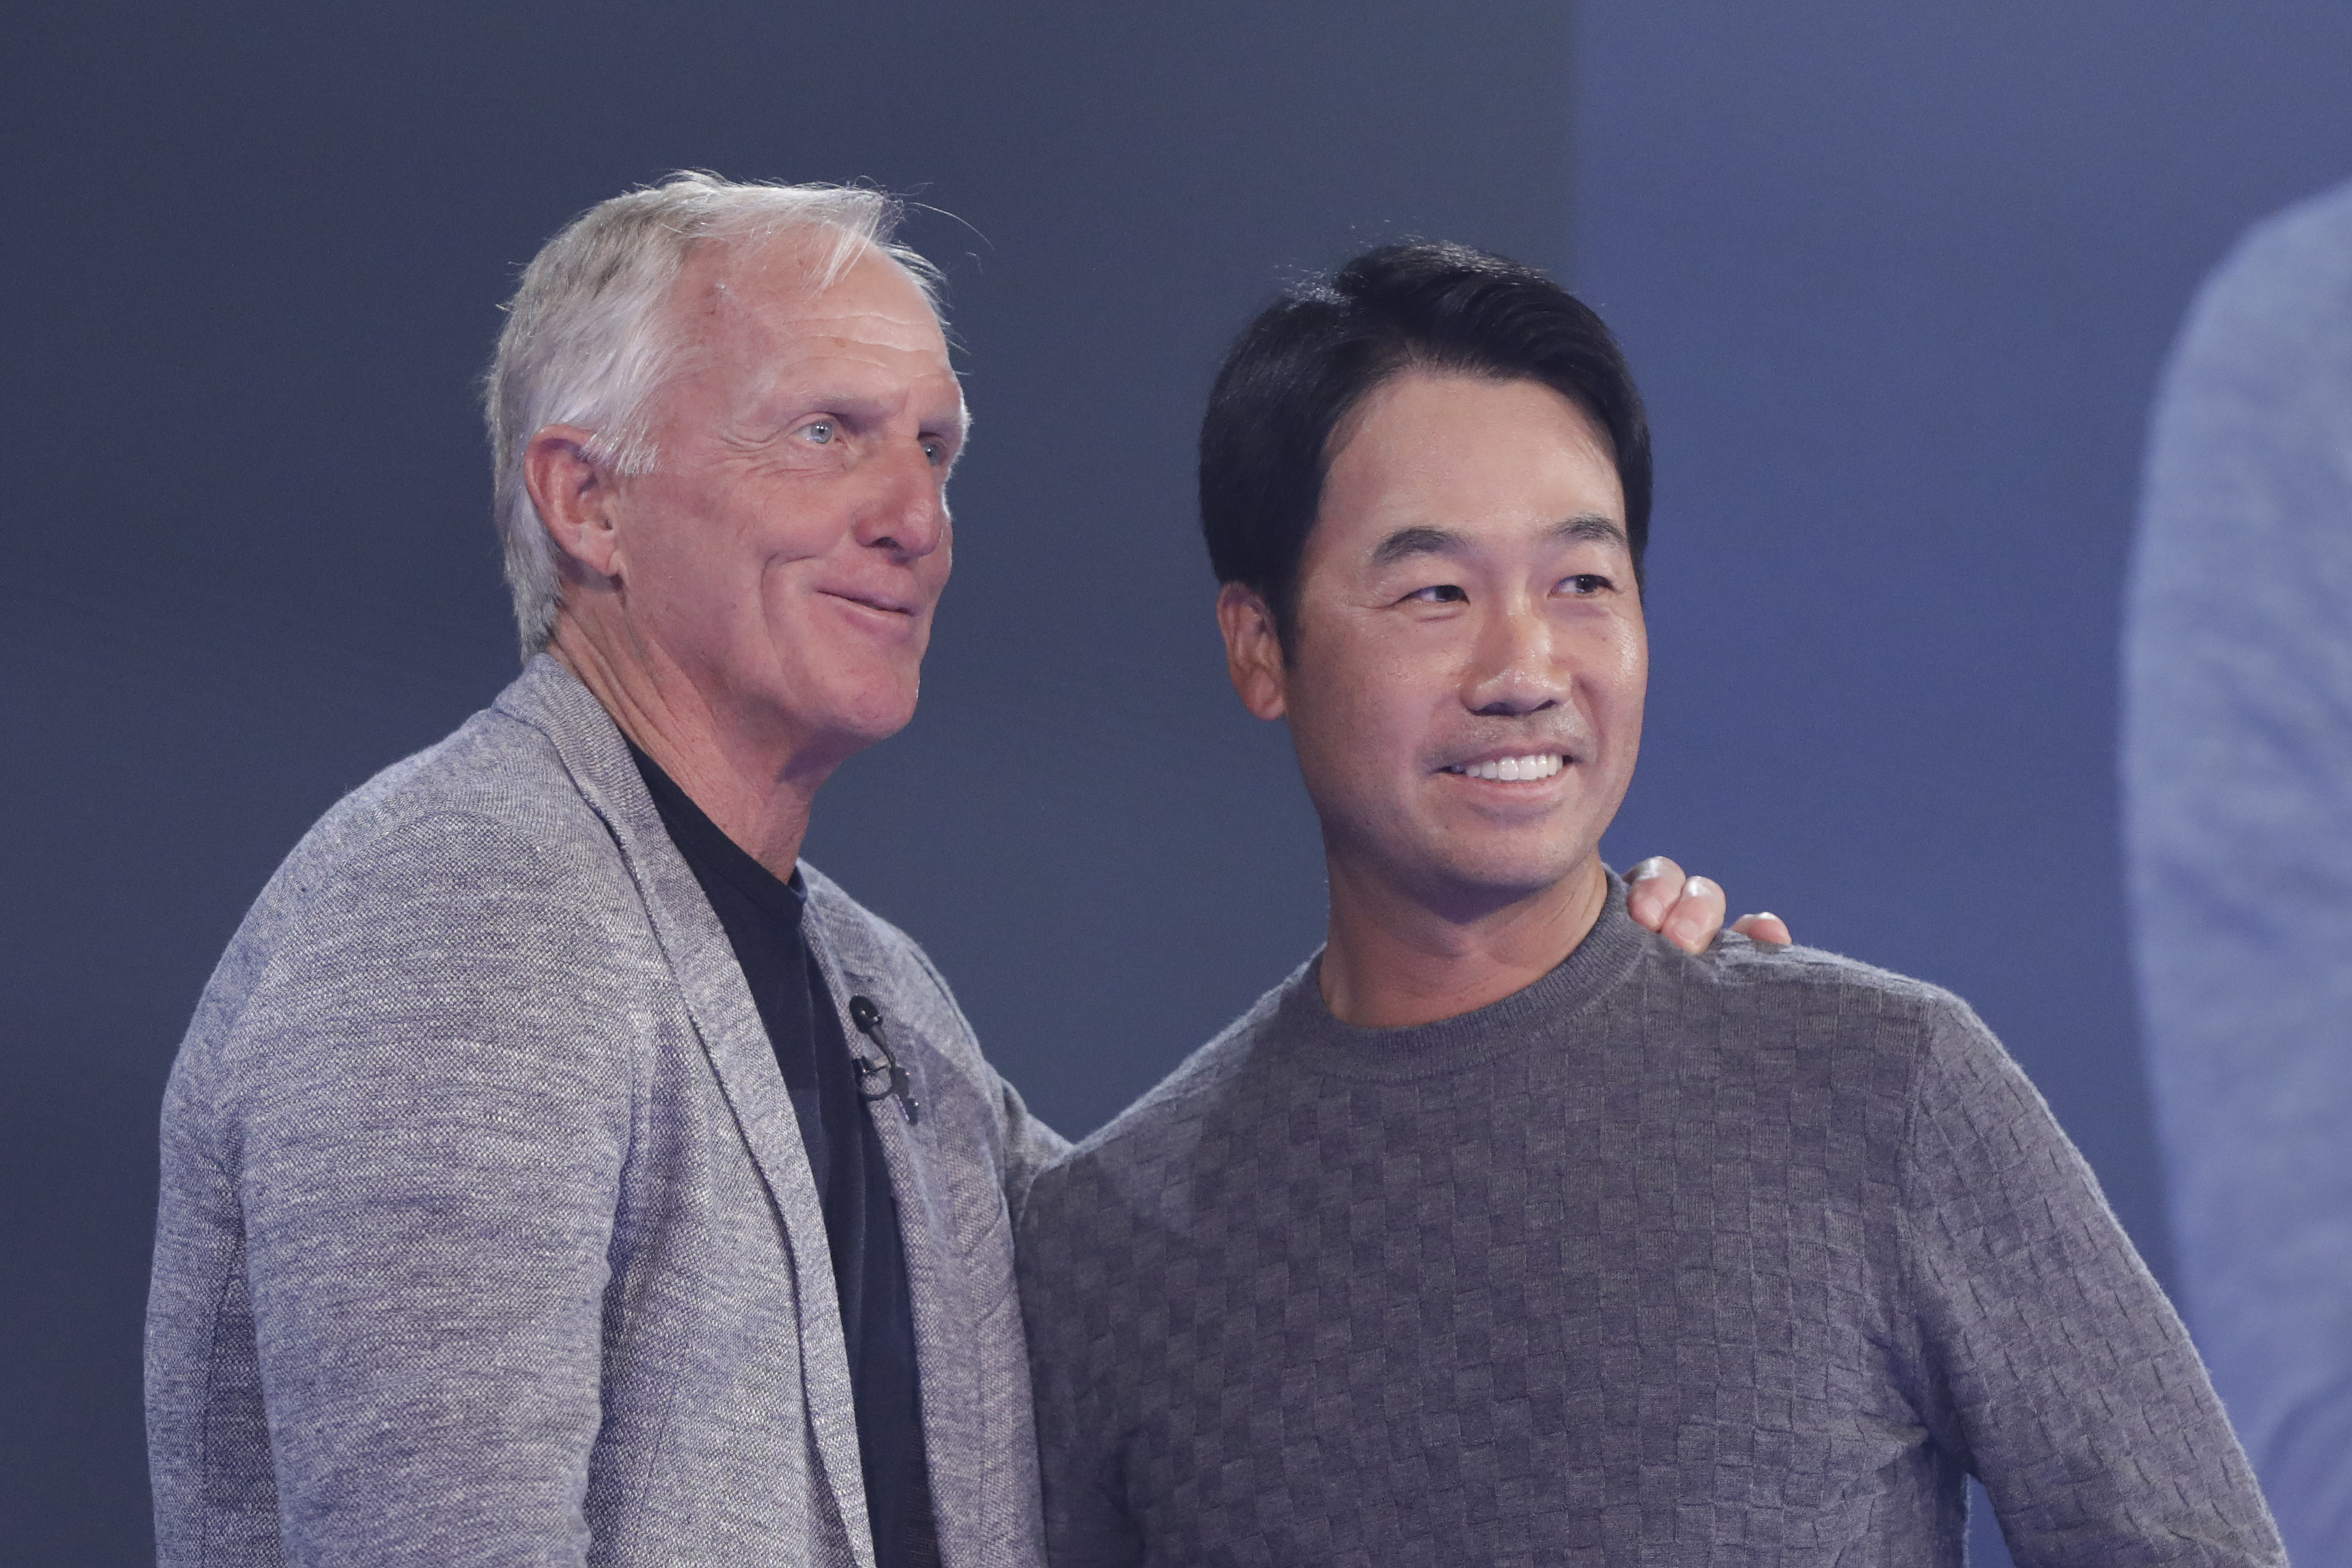 Greg Norman poses for a photograph with Kevin Na during the LIV Golf Invitational - London Draft on June 07, 2022 in London, England.